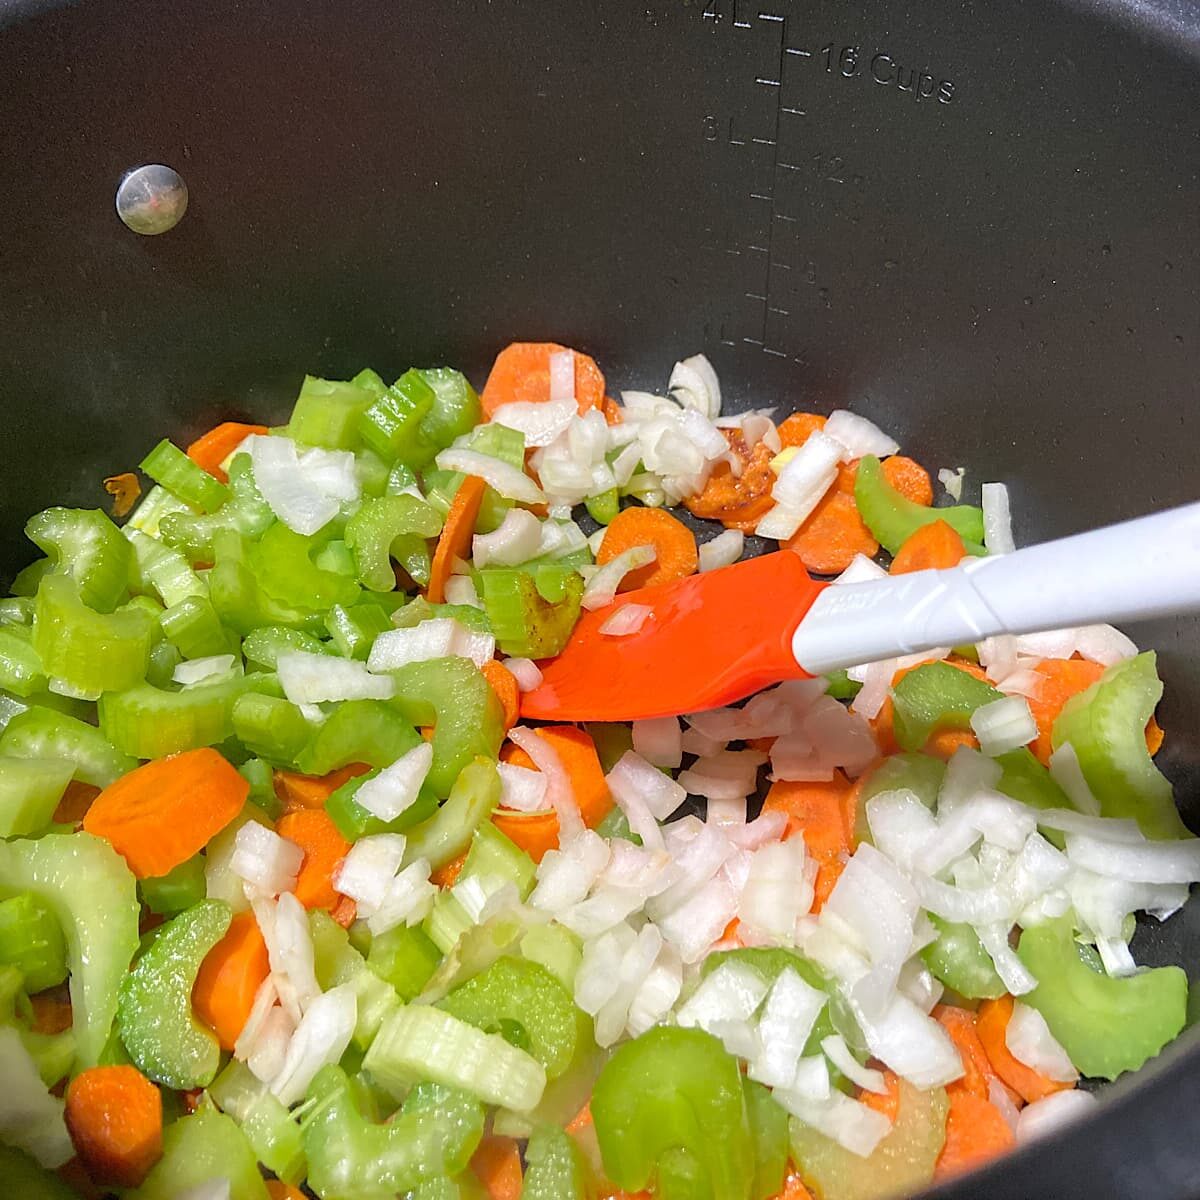 saute carrots, celery, onion, and garlic in olive oil in large pan.